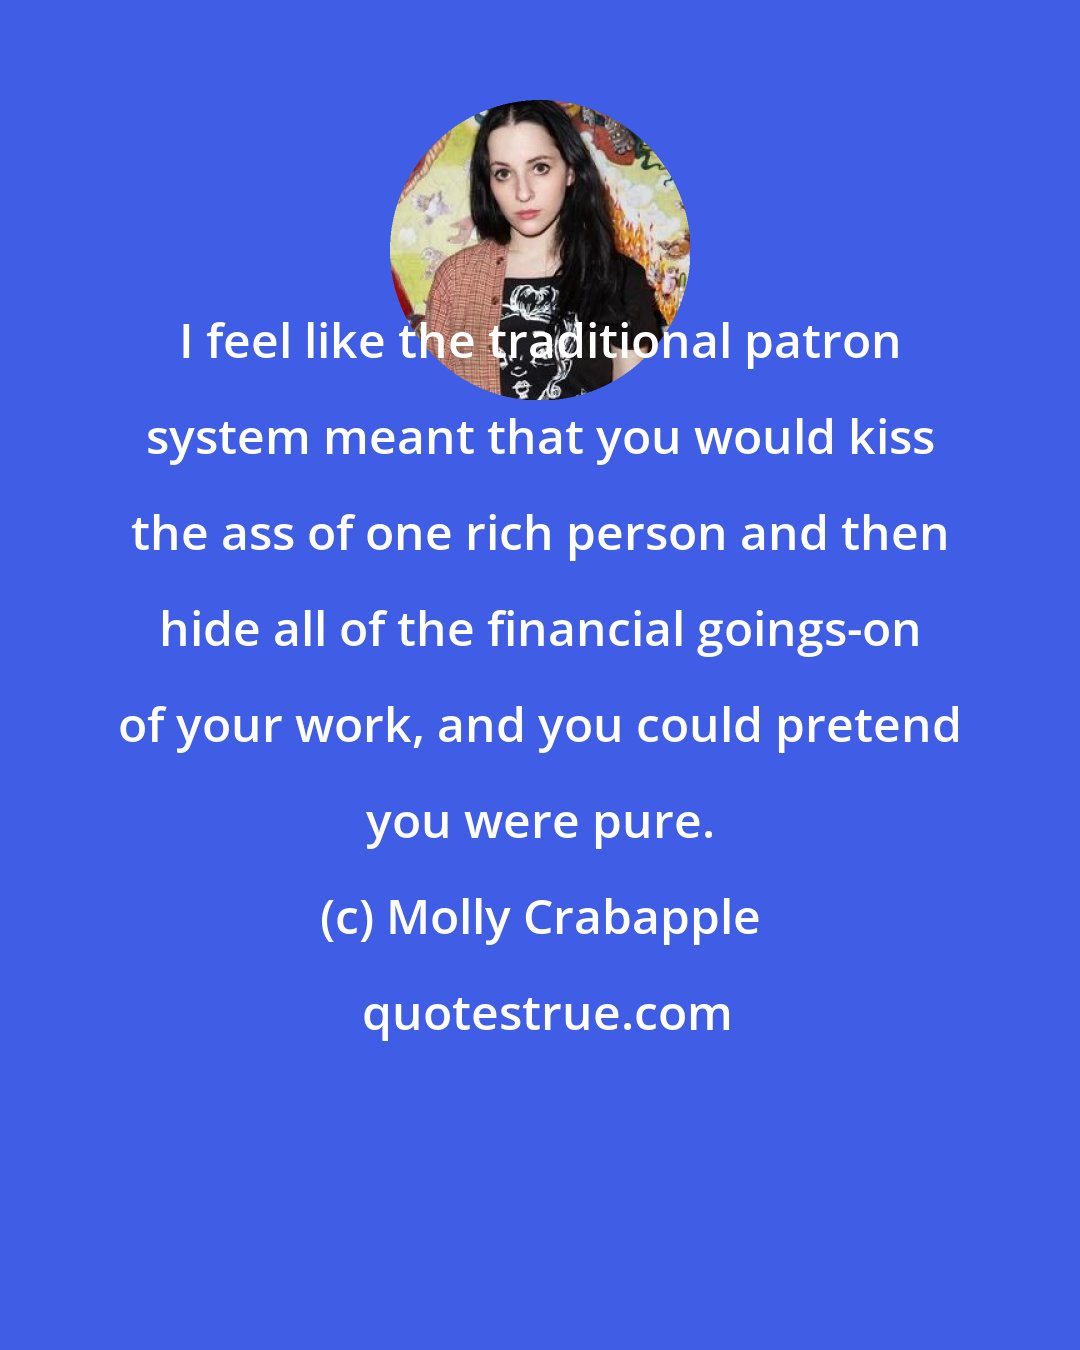 Molly Crabapple: I feel like the traditional patron system meant that you would kiss the ass of one rich person and then hide all of the financial goings-on of your work, and you could pretend you were pure.